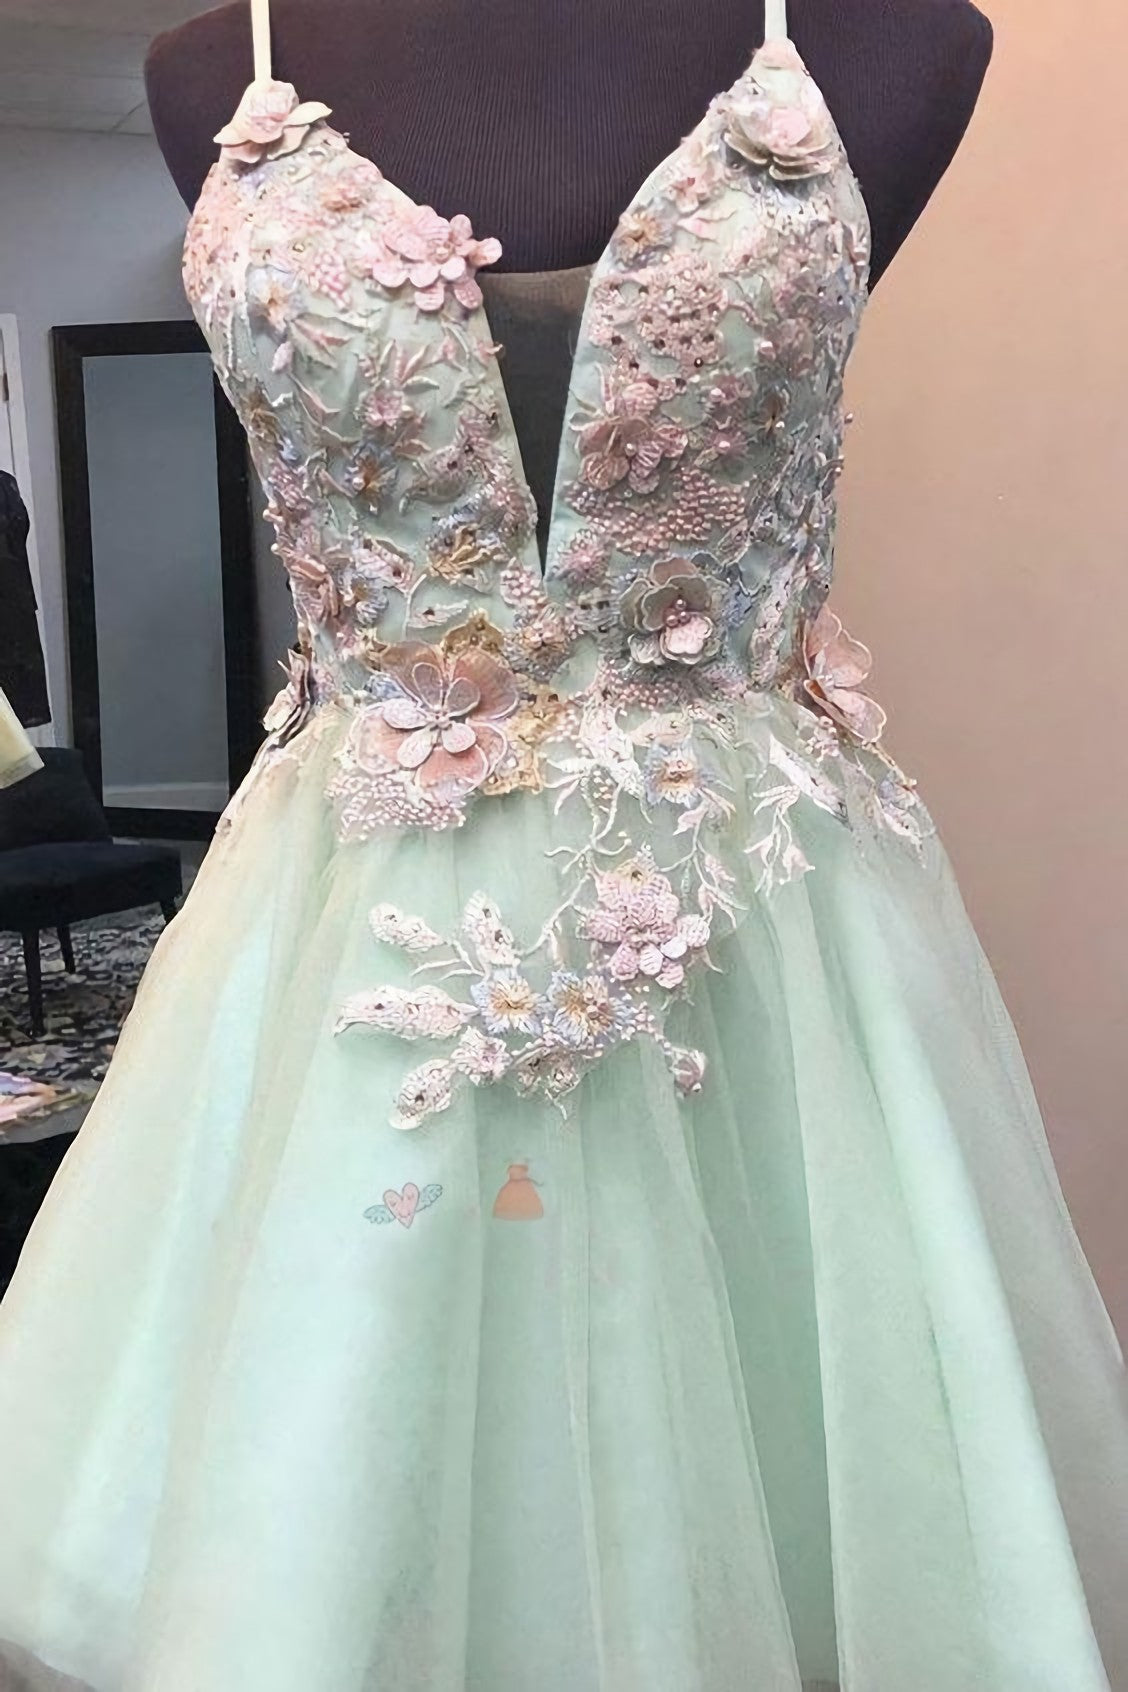 Bridesmaid Dresses Hunter Green, Mint Green Short Homecoming Dress, With Flowers Mini Tulle Graduation Dress, With Pearls